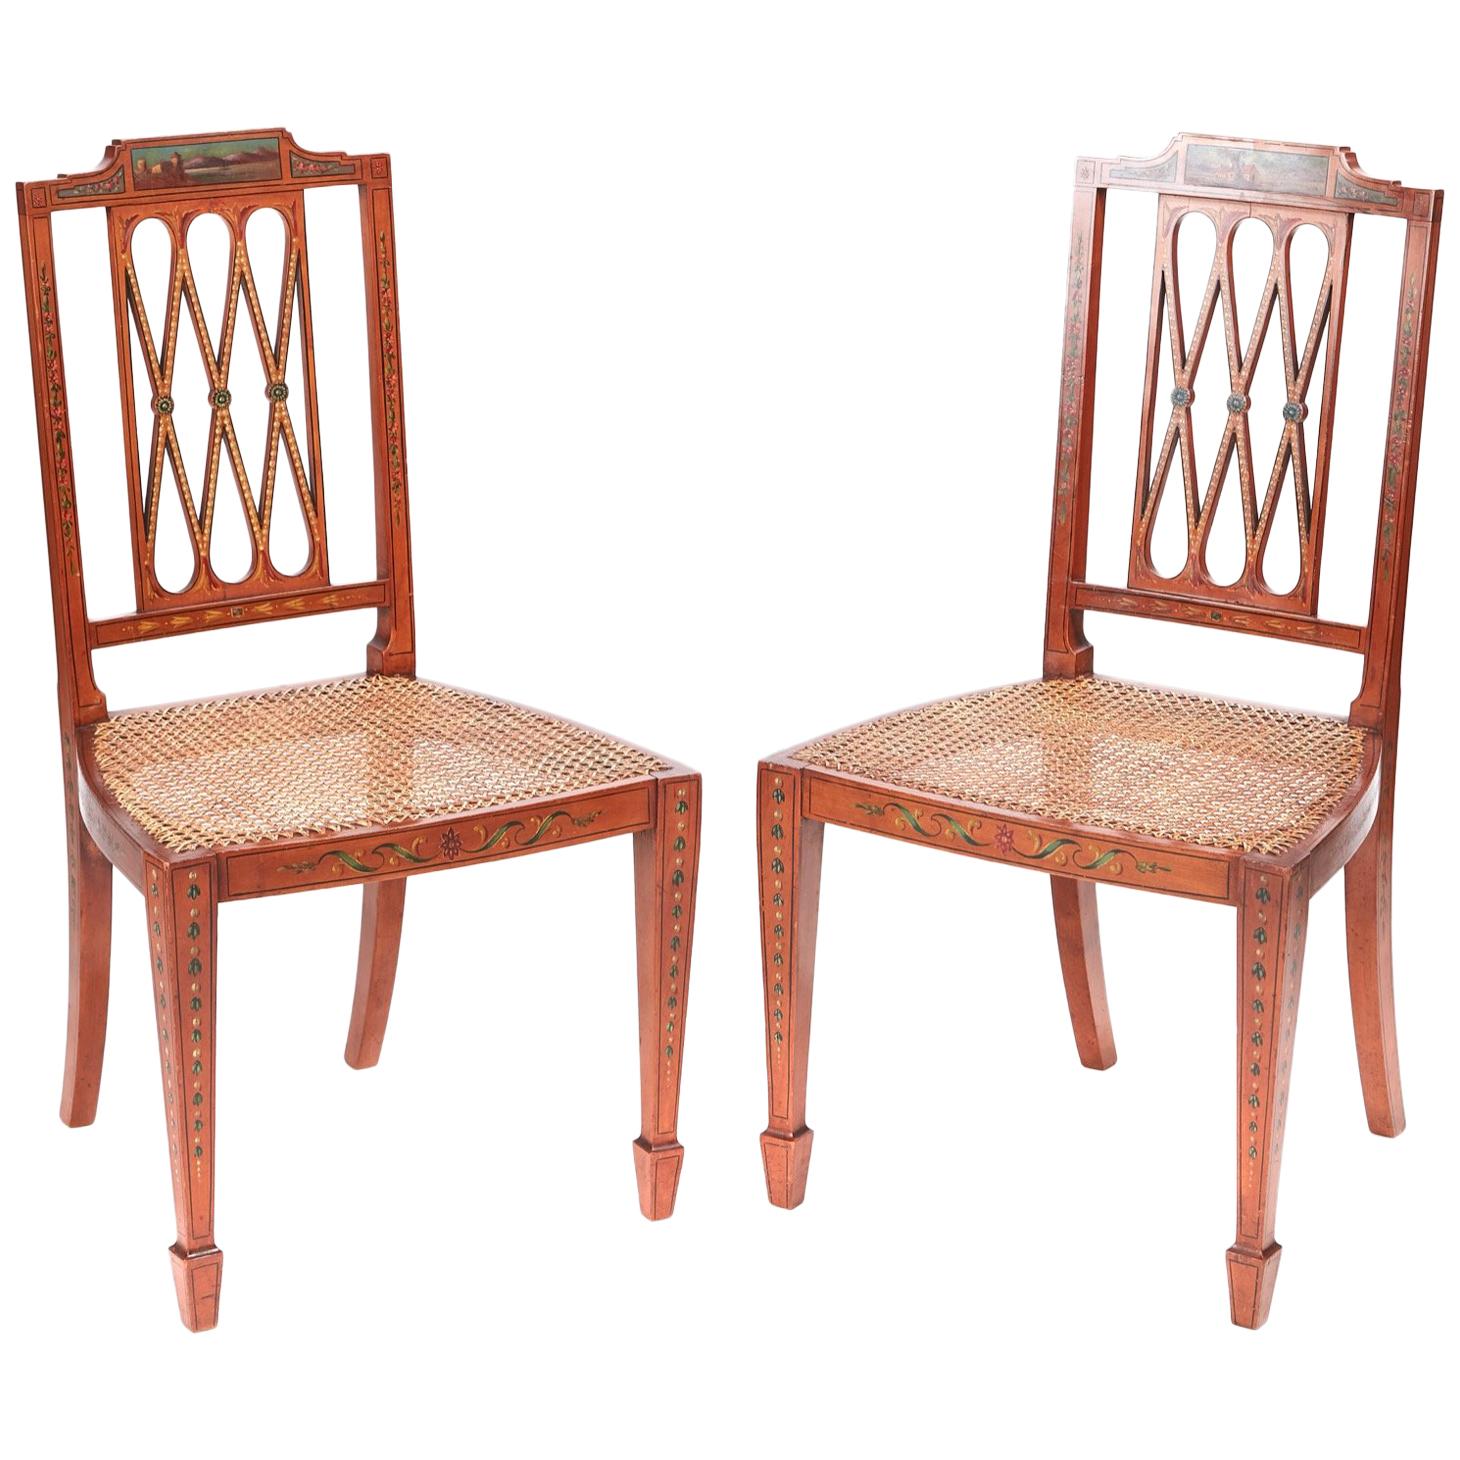 Fine Quality Pair of Original Painted Satinwood Side Chairs